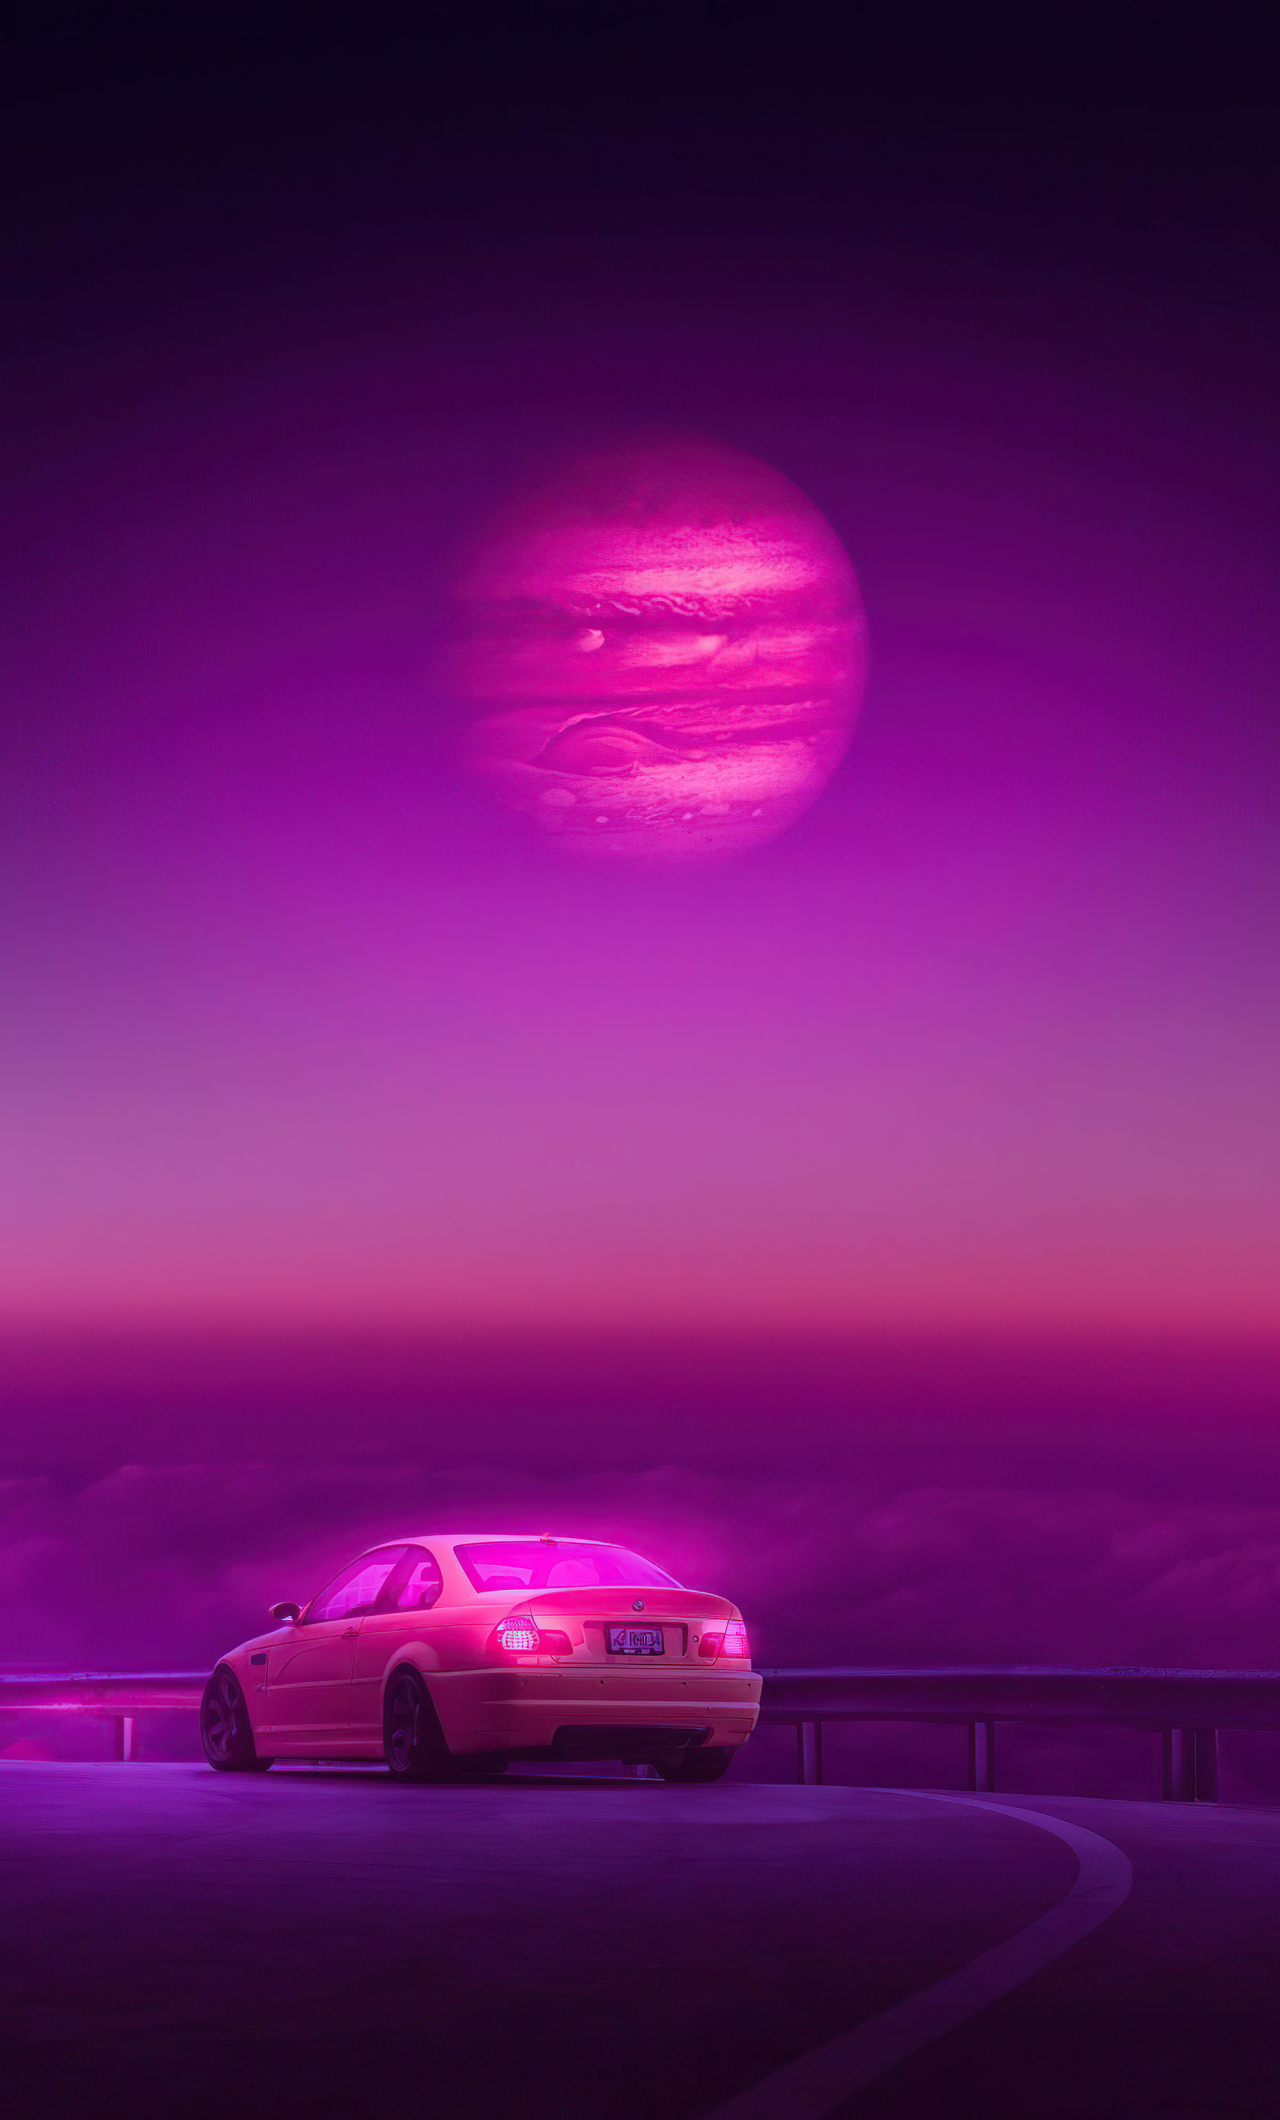 A car on a highway with a purple sky - BMW